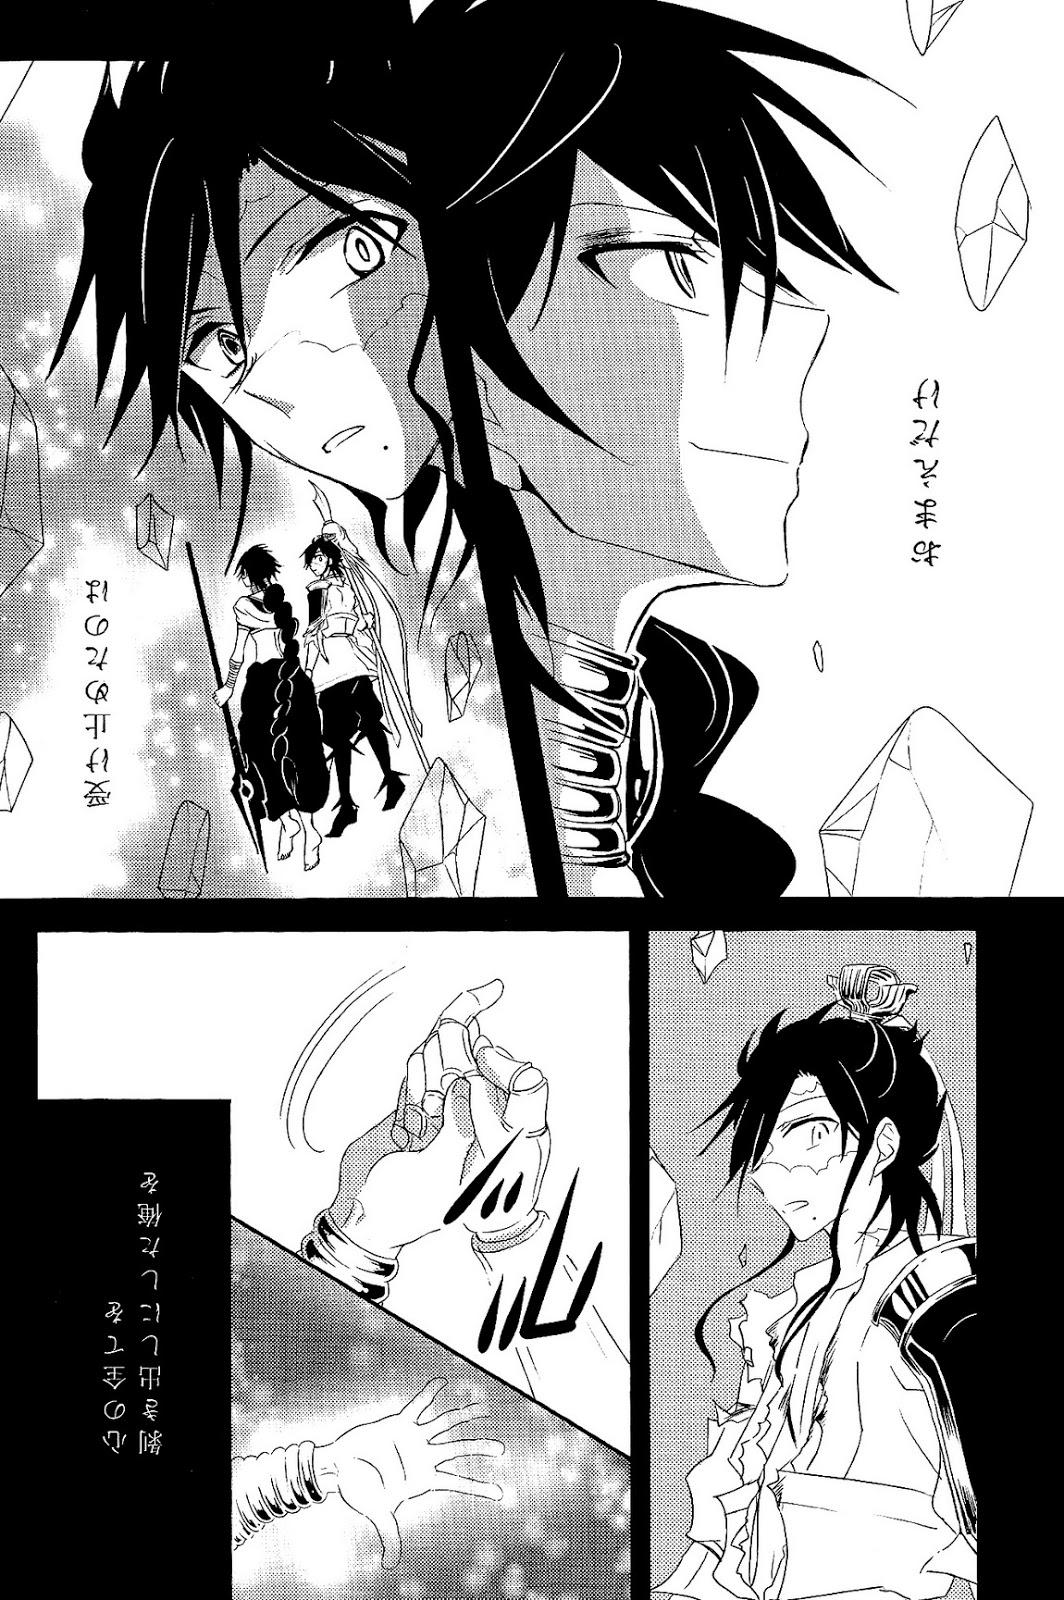 Pure 18 One after another ―Are Ato ni Saku Hana― - Magi the labyrinth of magic Blackmail - Page 4